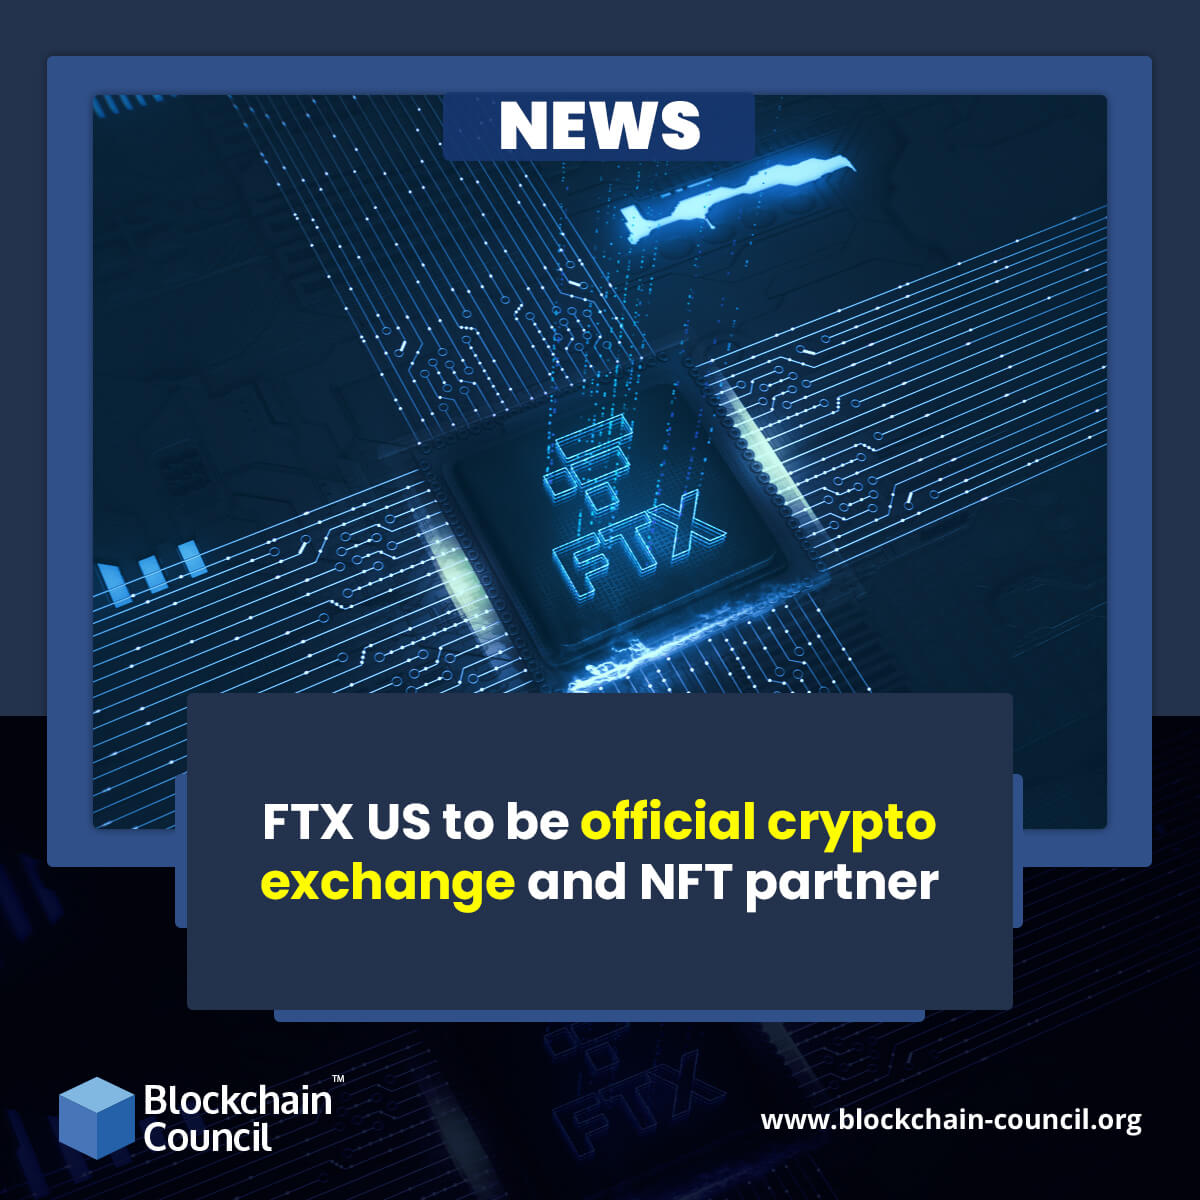 FTX US to be official crypto exchange and NFT partner